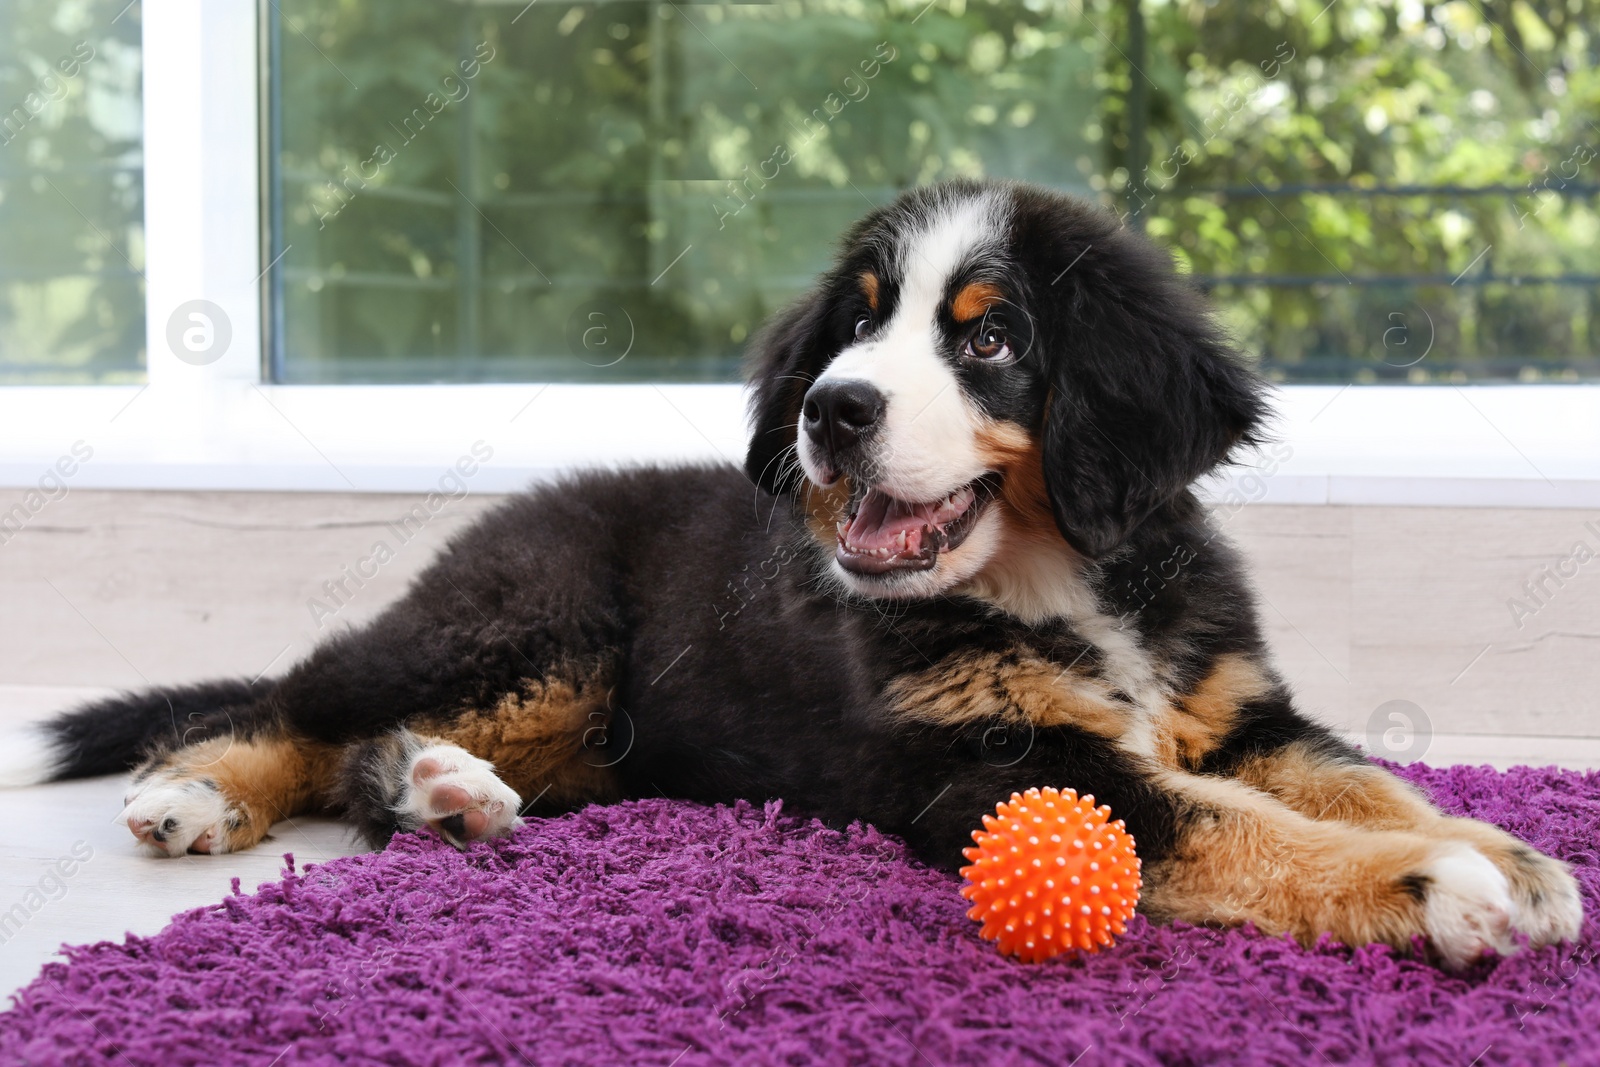 Photo of Adorable Bernese Mountain Dog puppy on fuzzy rug indoors